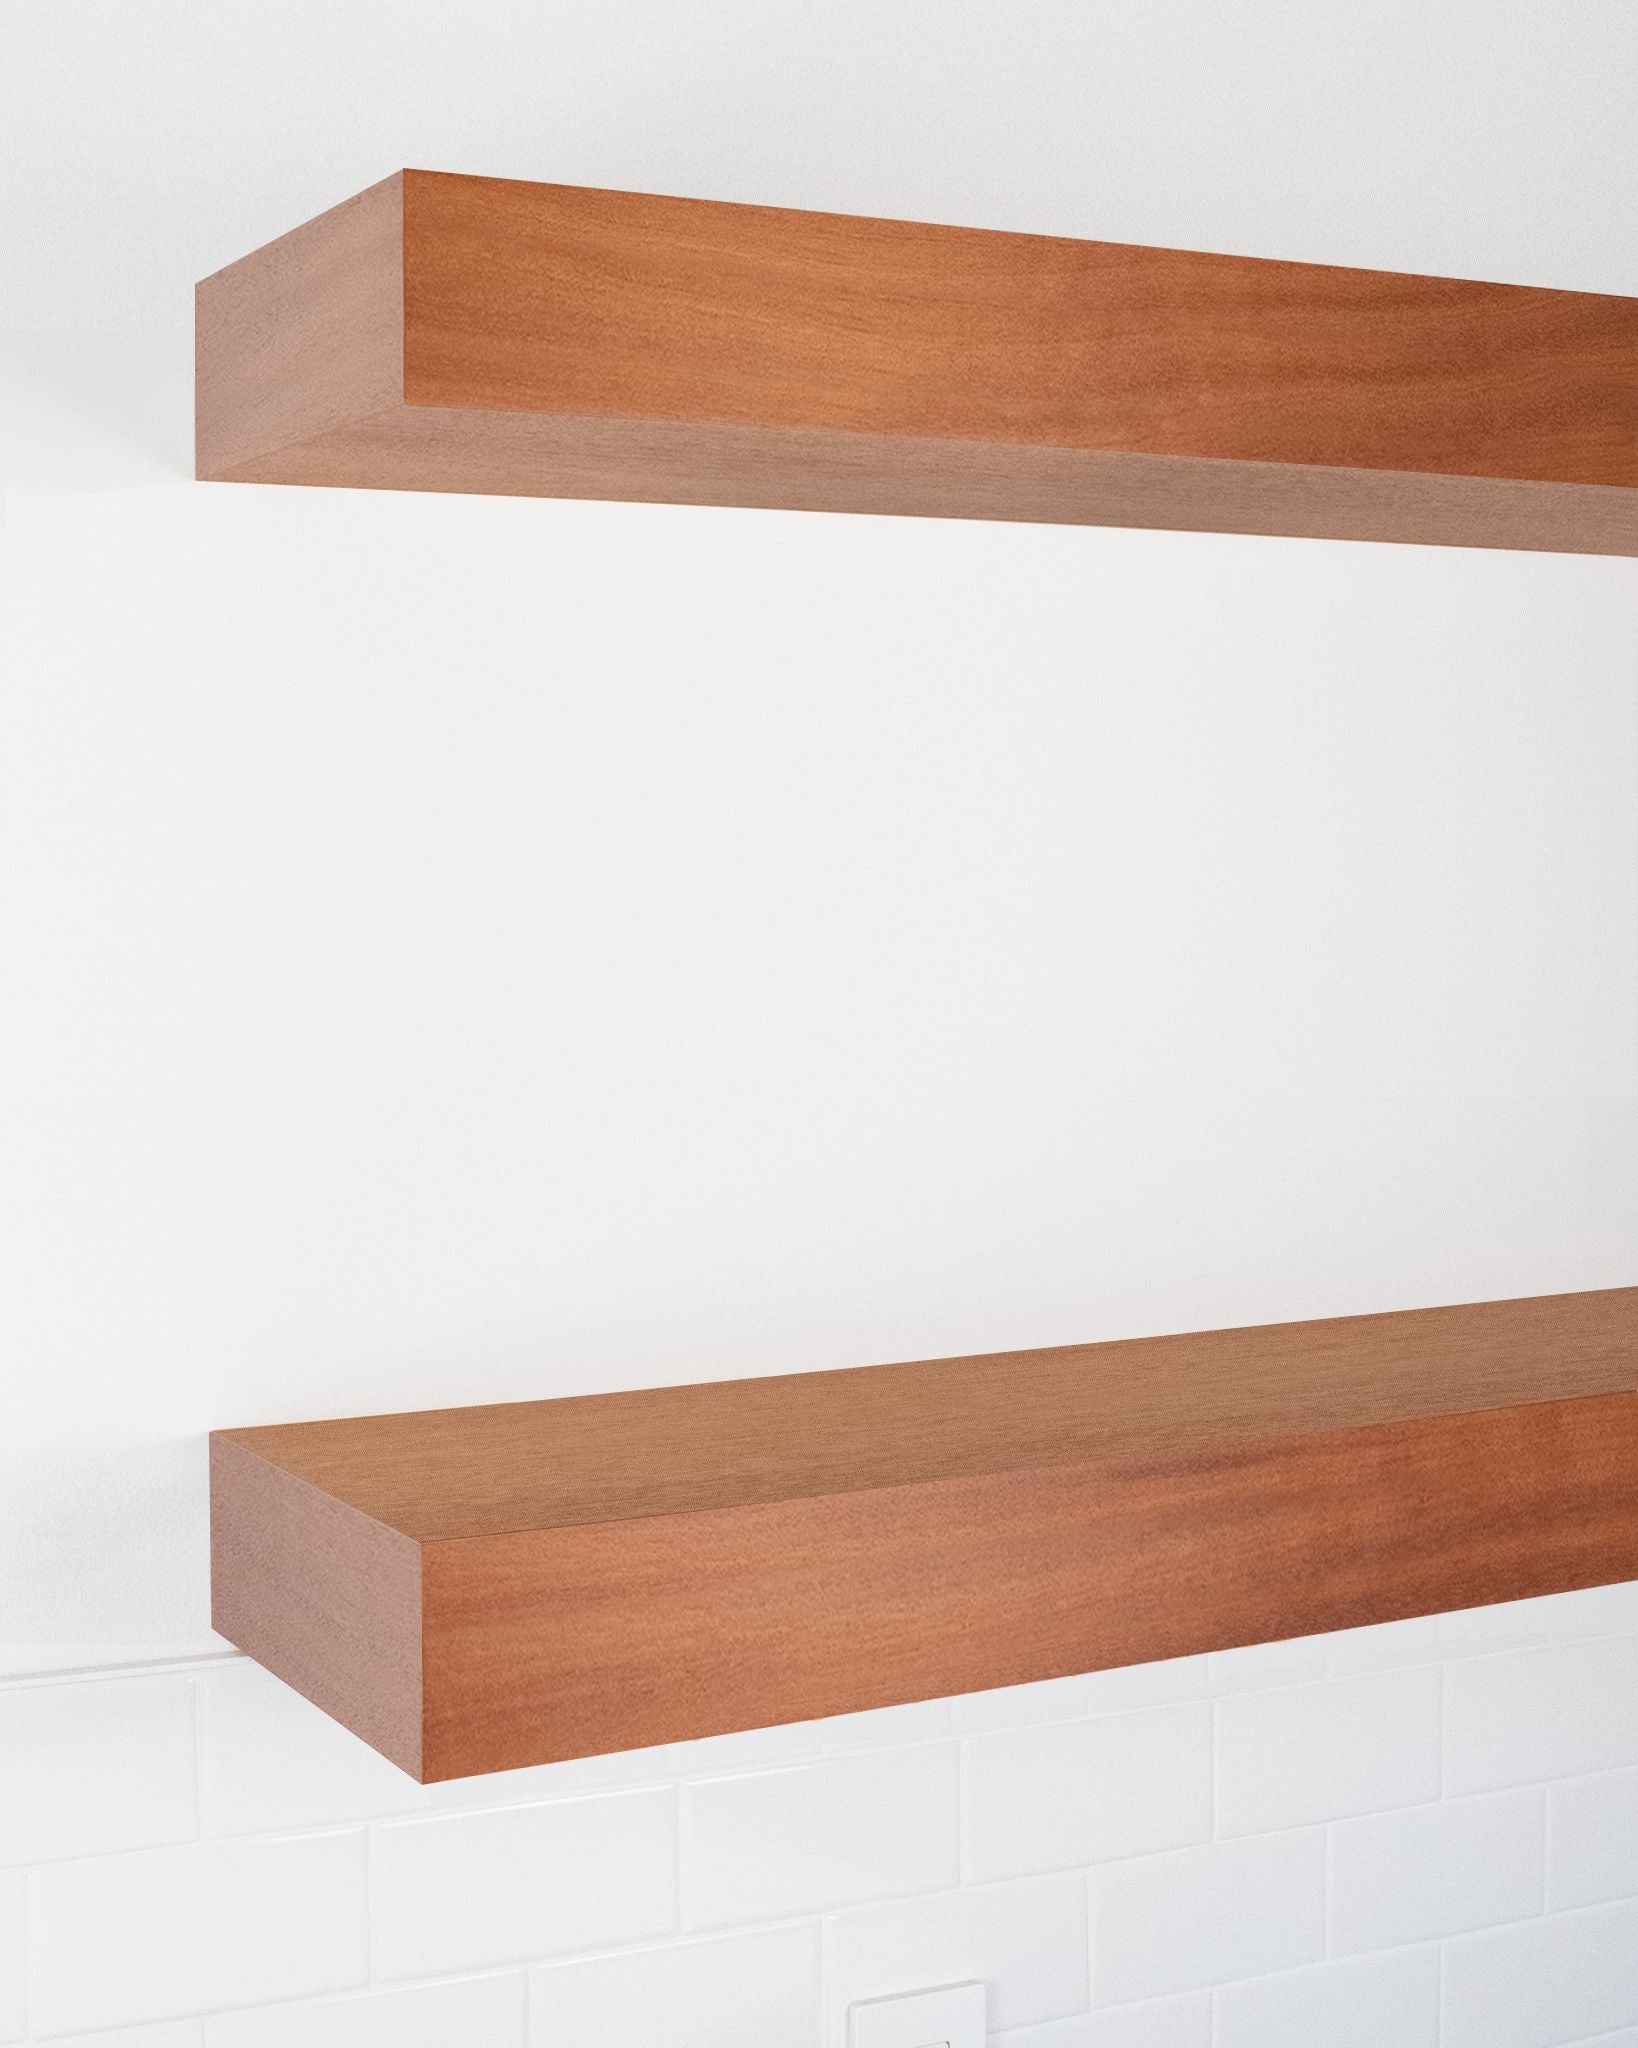 African Mahogany Floating Shelves 2-4" thick